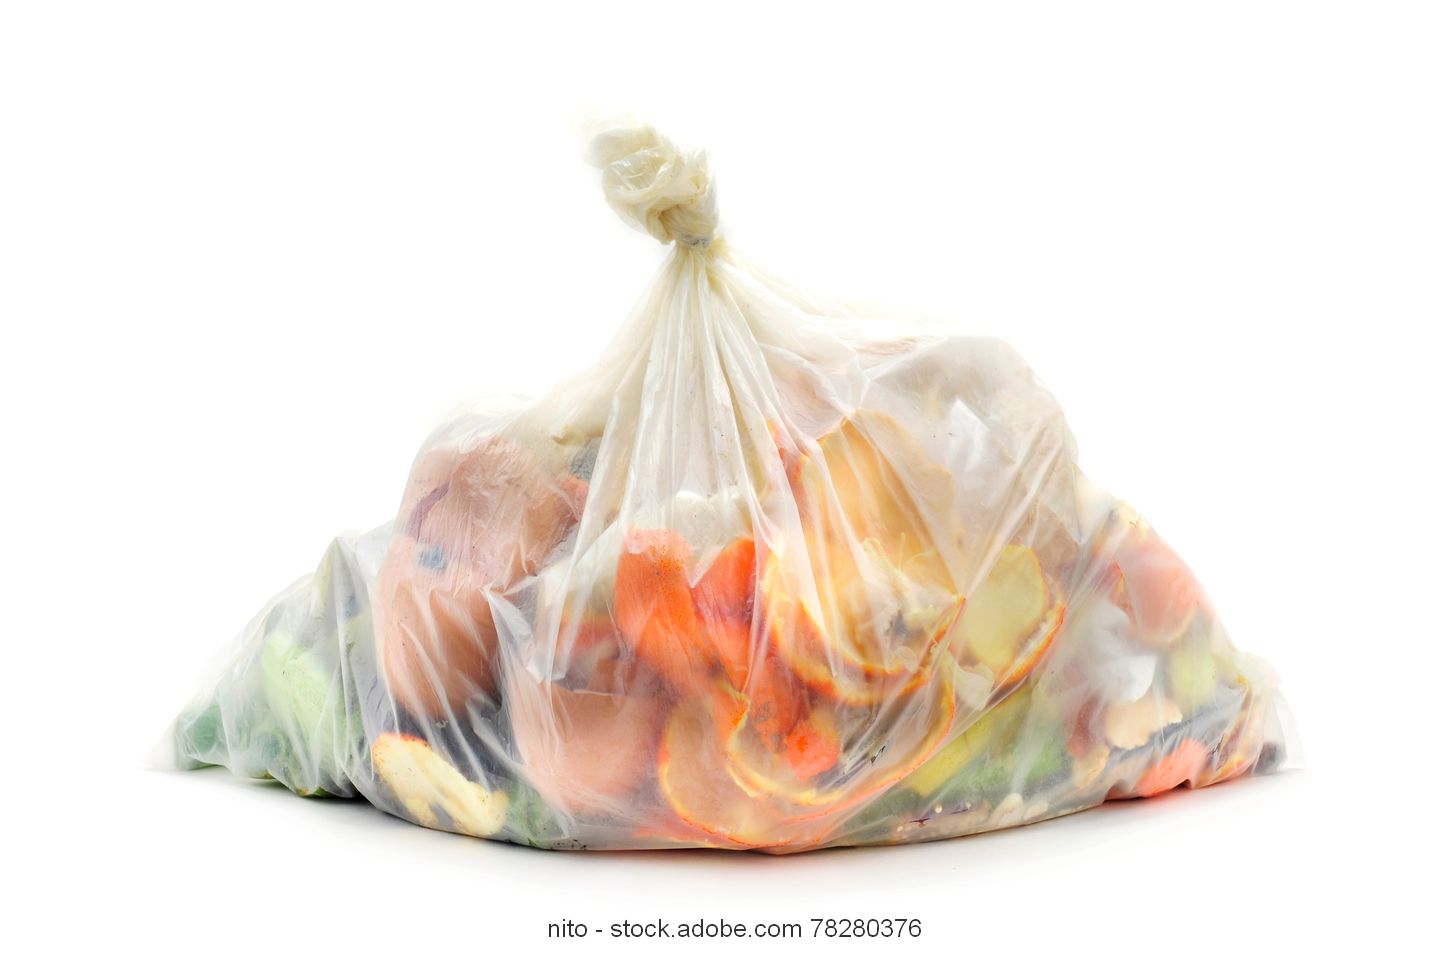 Mixed organic waste in a biodegradable plastic bag